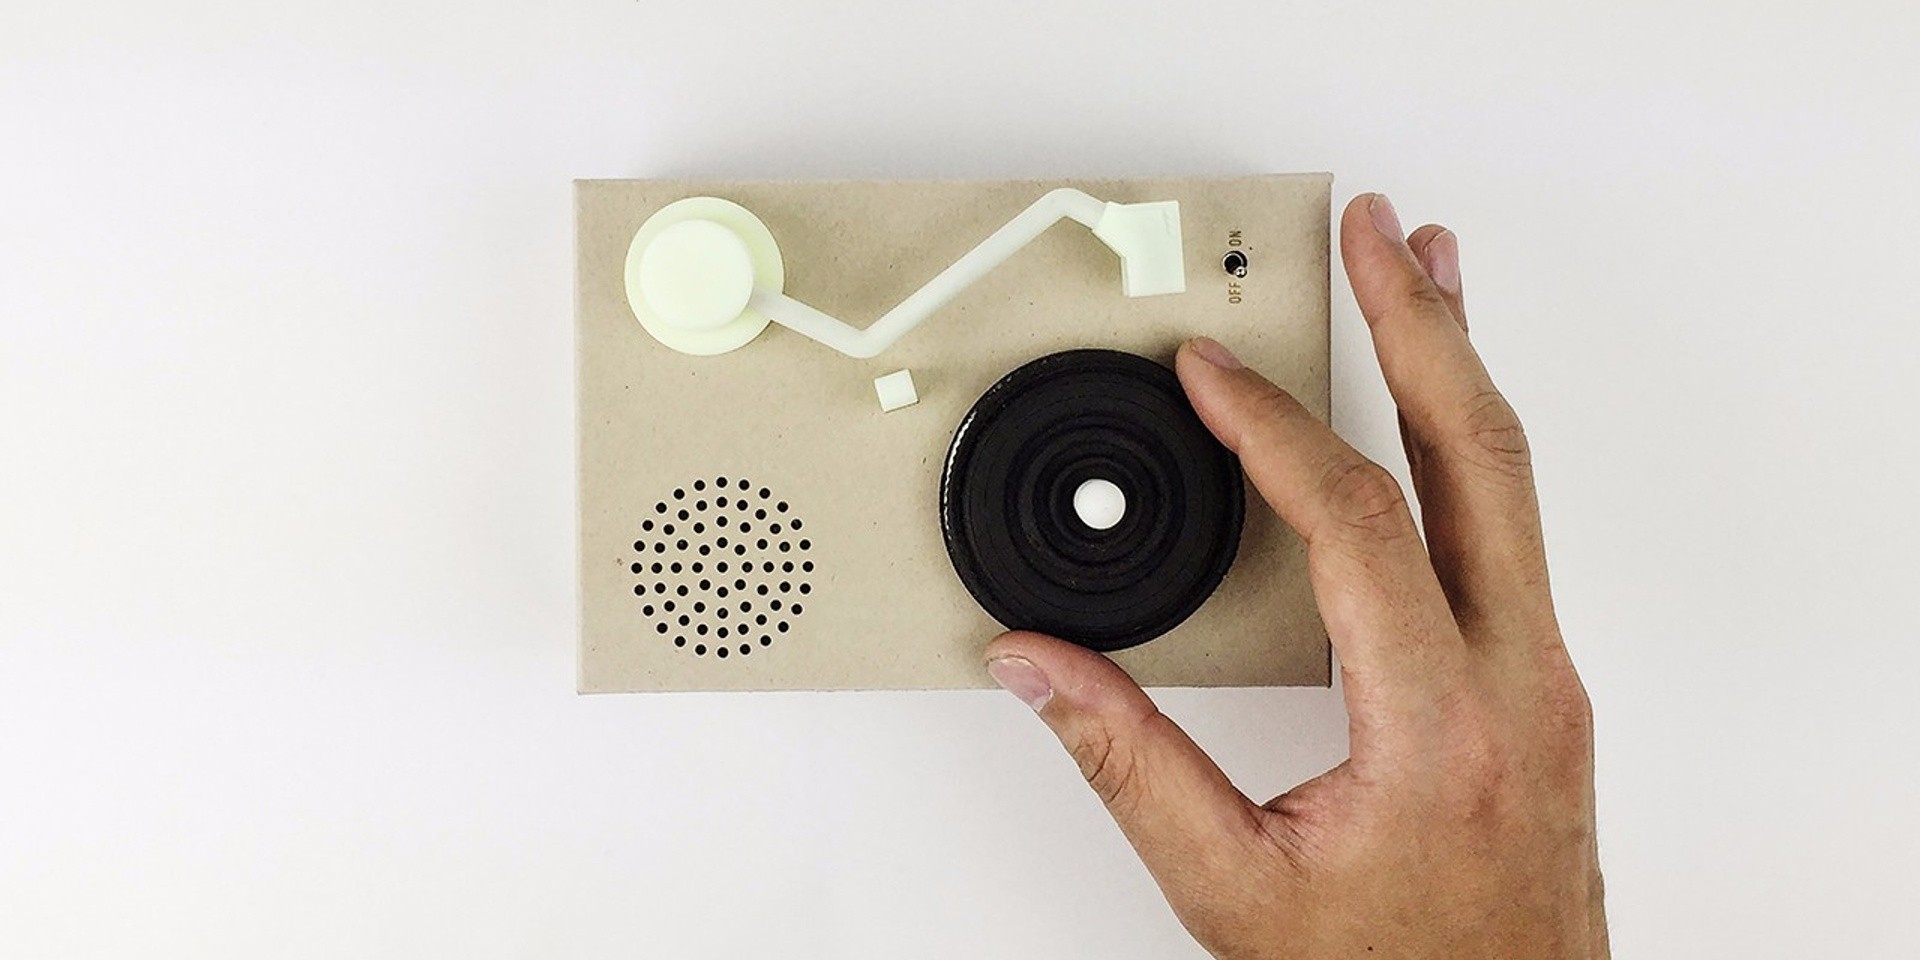 Oreo cookies get turned into playable vinyl records for new campaign